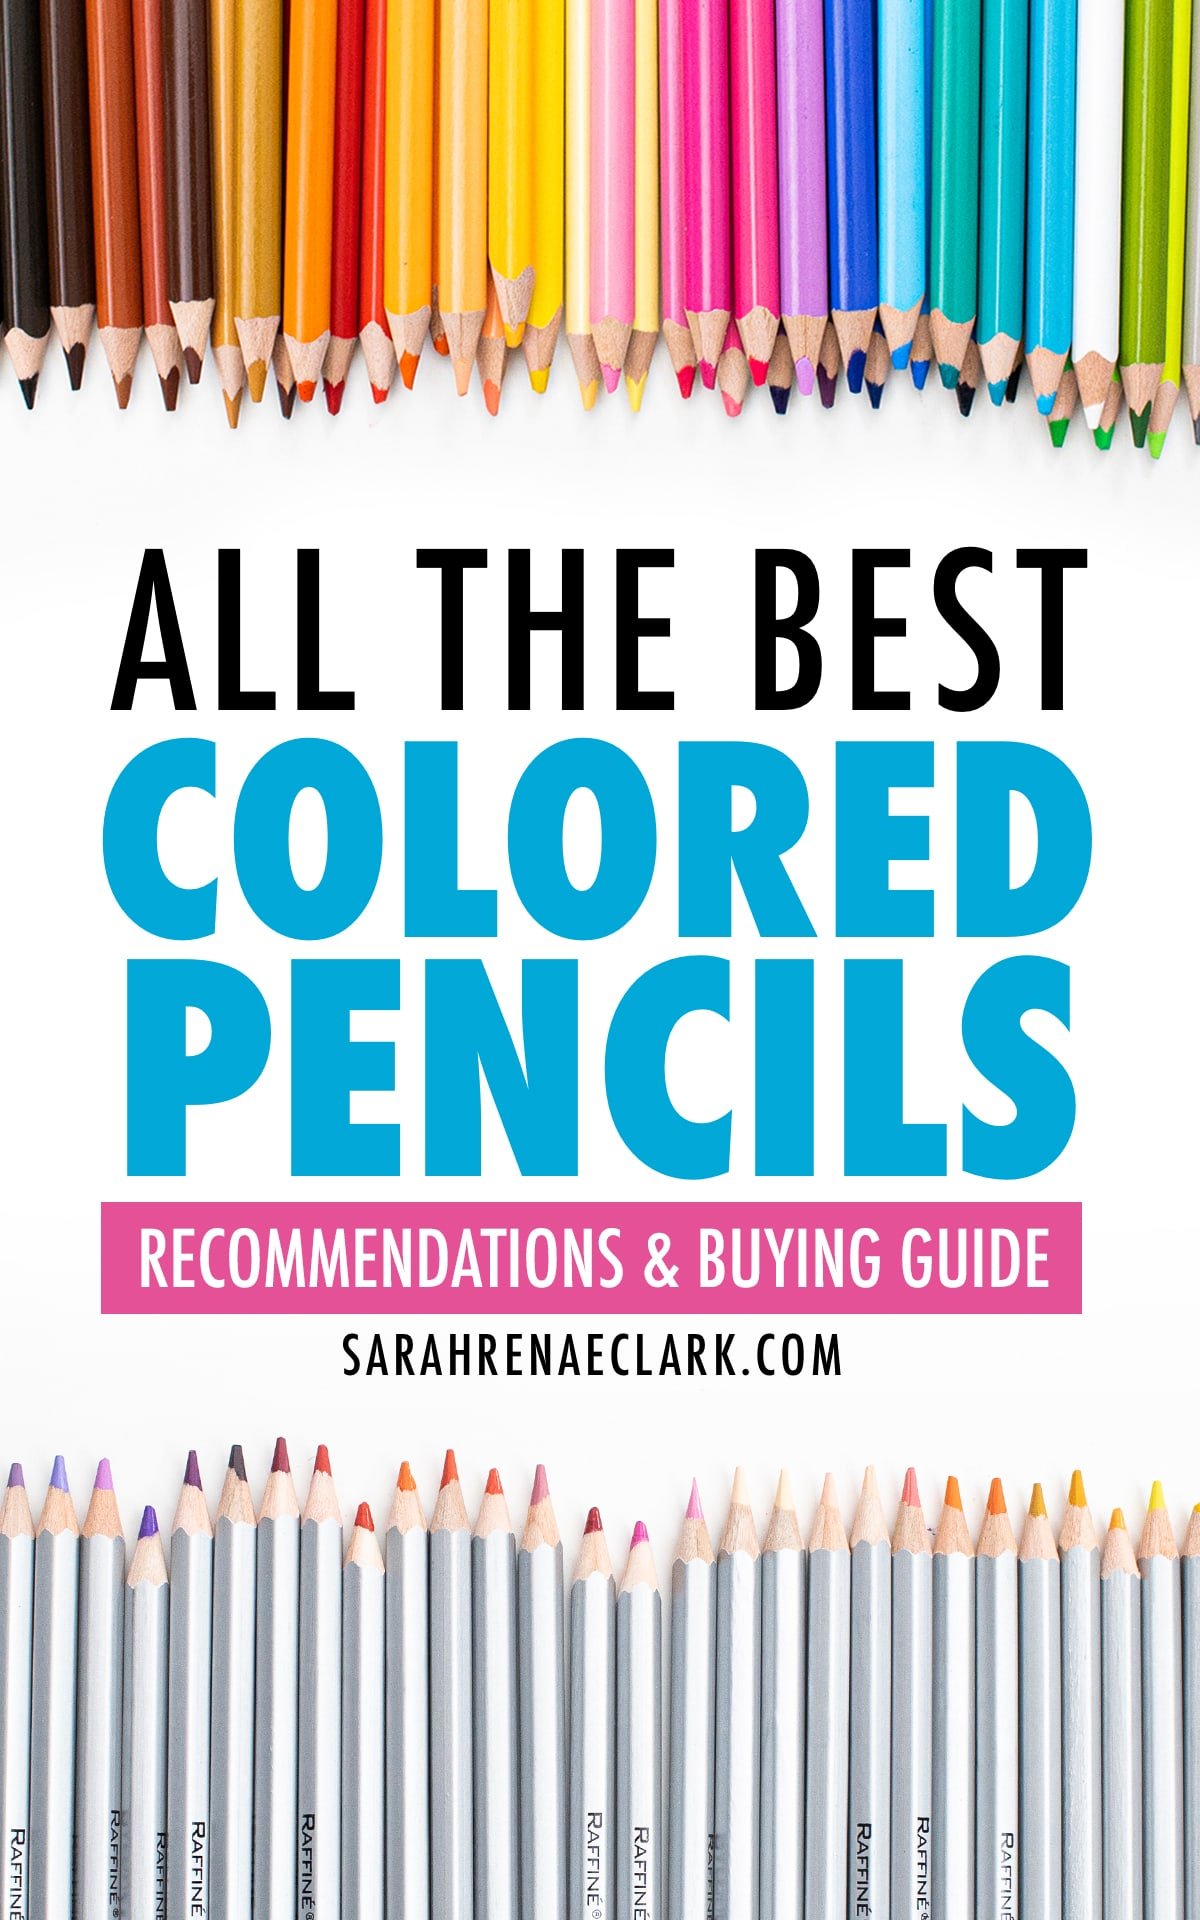 Recommendations & Buying Guide for The Best Colored Pencils